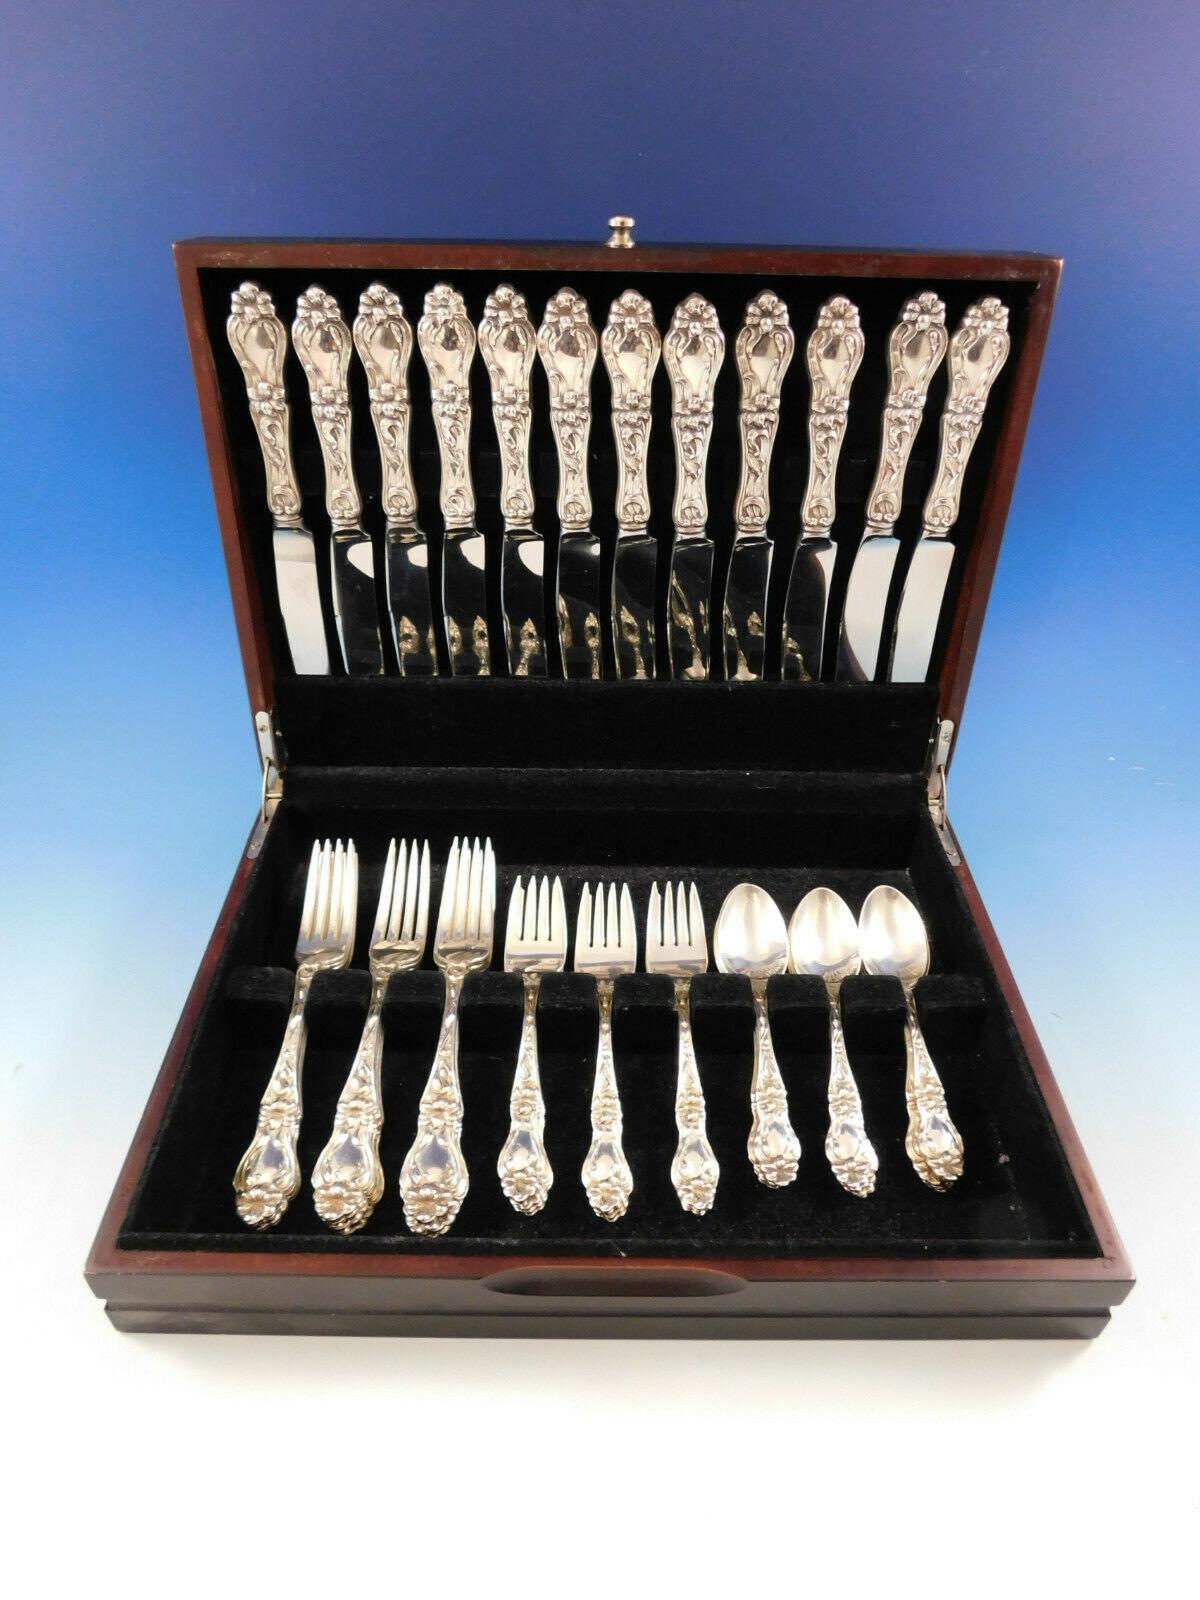 Dinner size Lily by Frank M. Whiting sterling silver flatware set, 48 pieces. This set includes:

 12 dinner size knives, 9 7/8